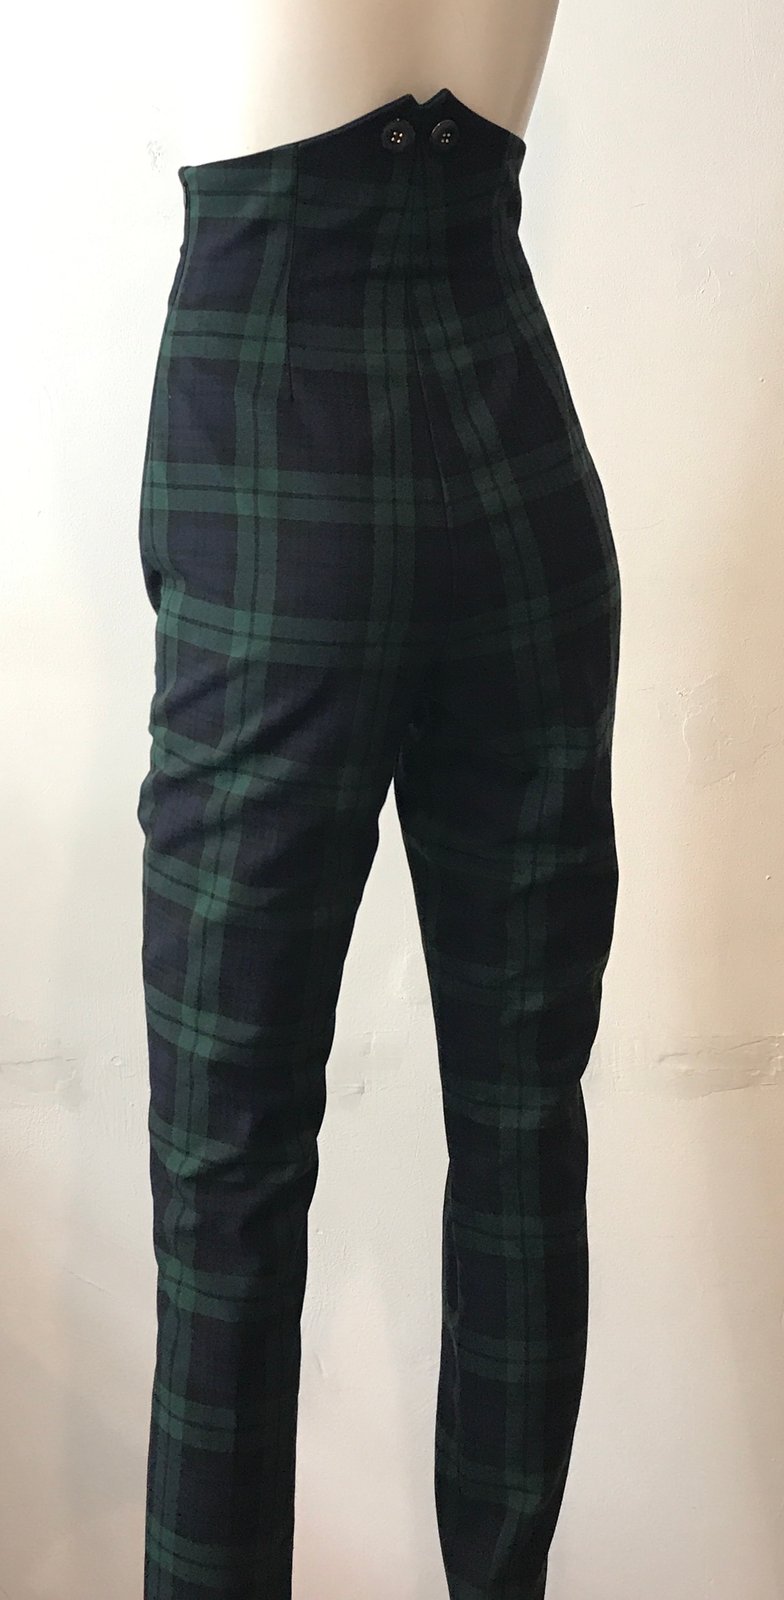 WDIRARA Women's Plaid Elastic High Waist Casual Tartan Pants with Pockets,  Black and White, X-Small : Amazon.ca: Clothing, Shoes & Accessories